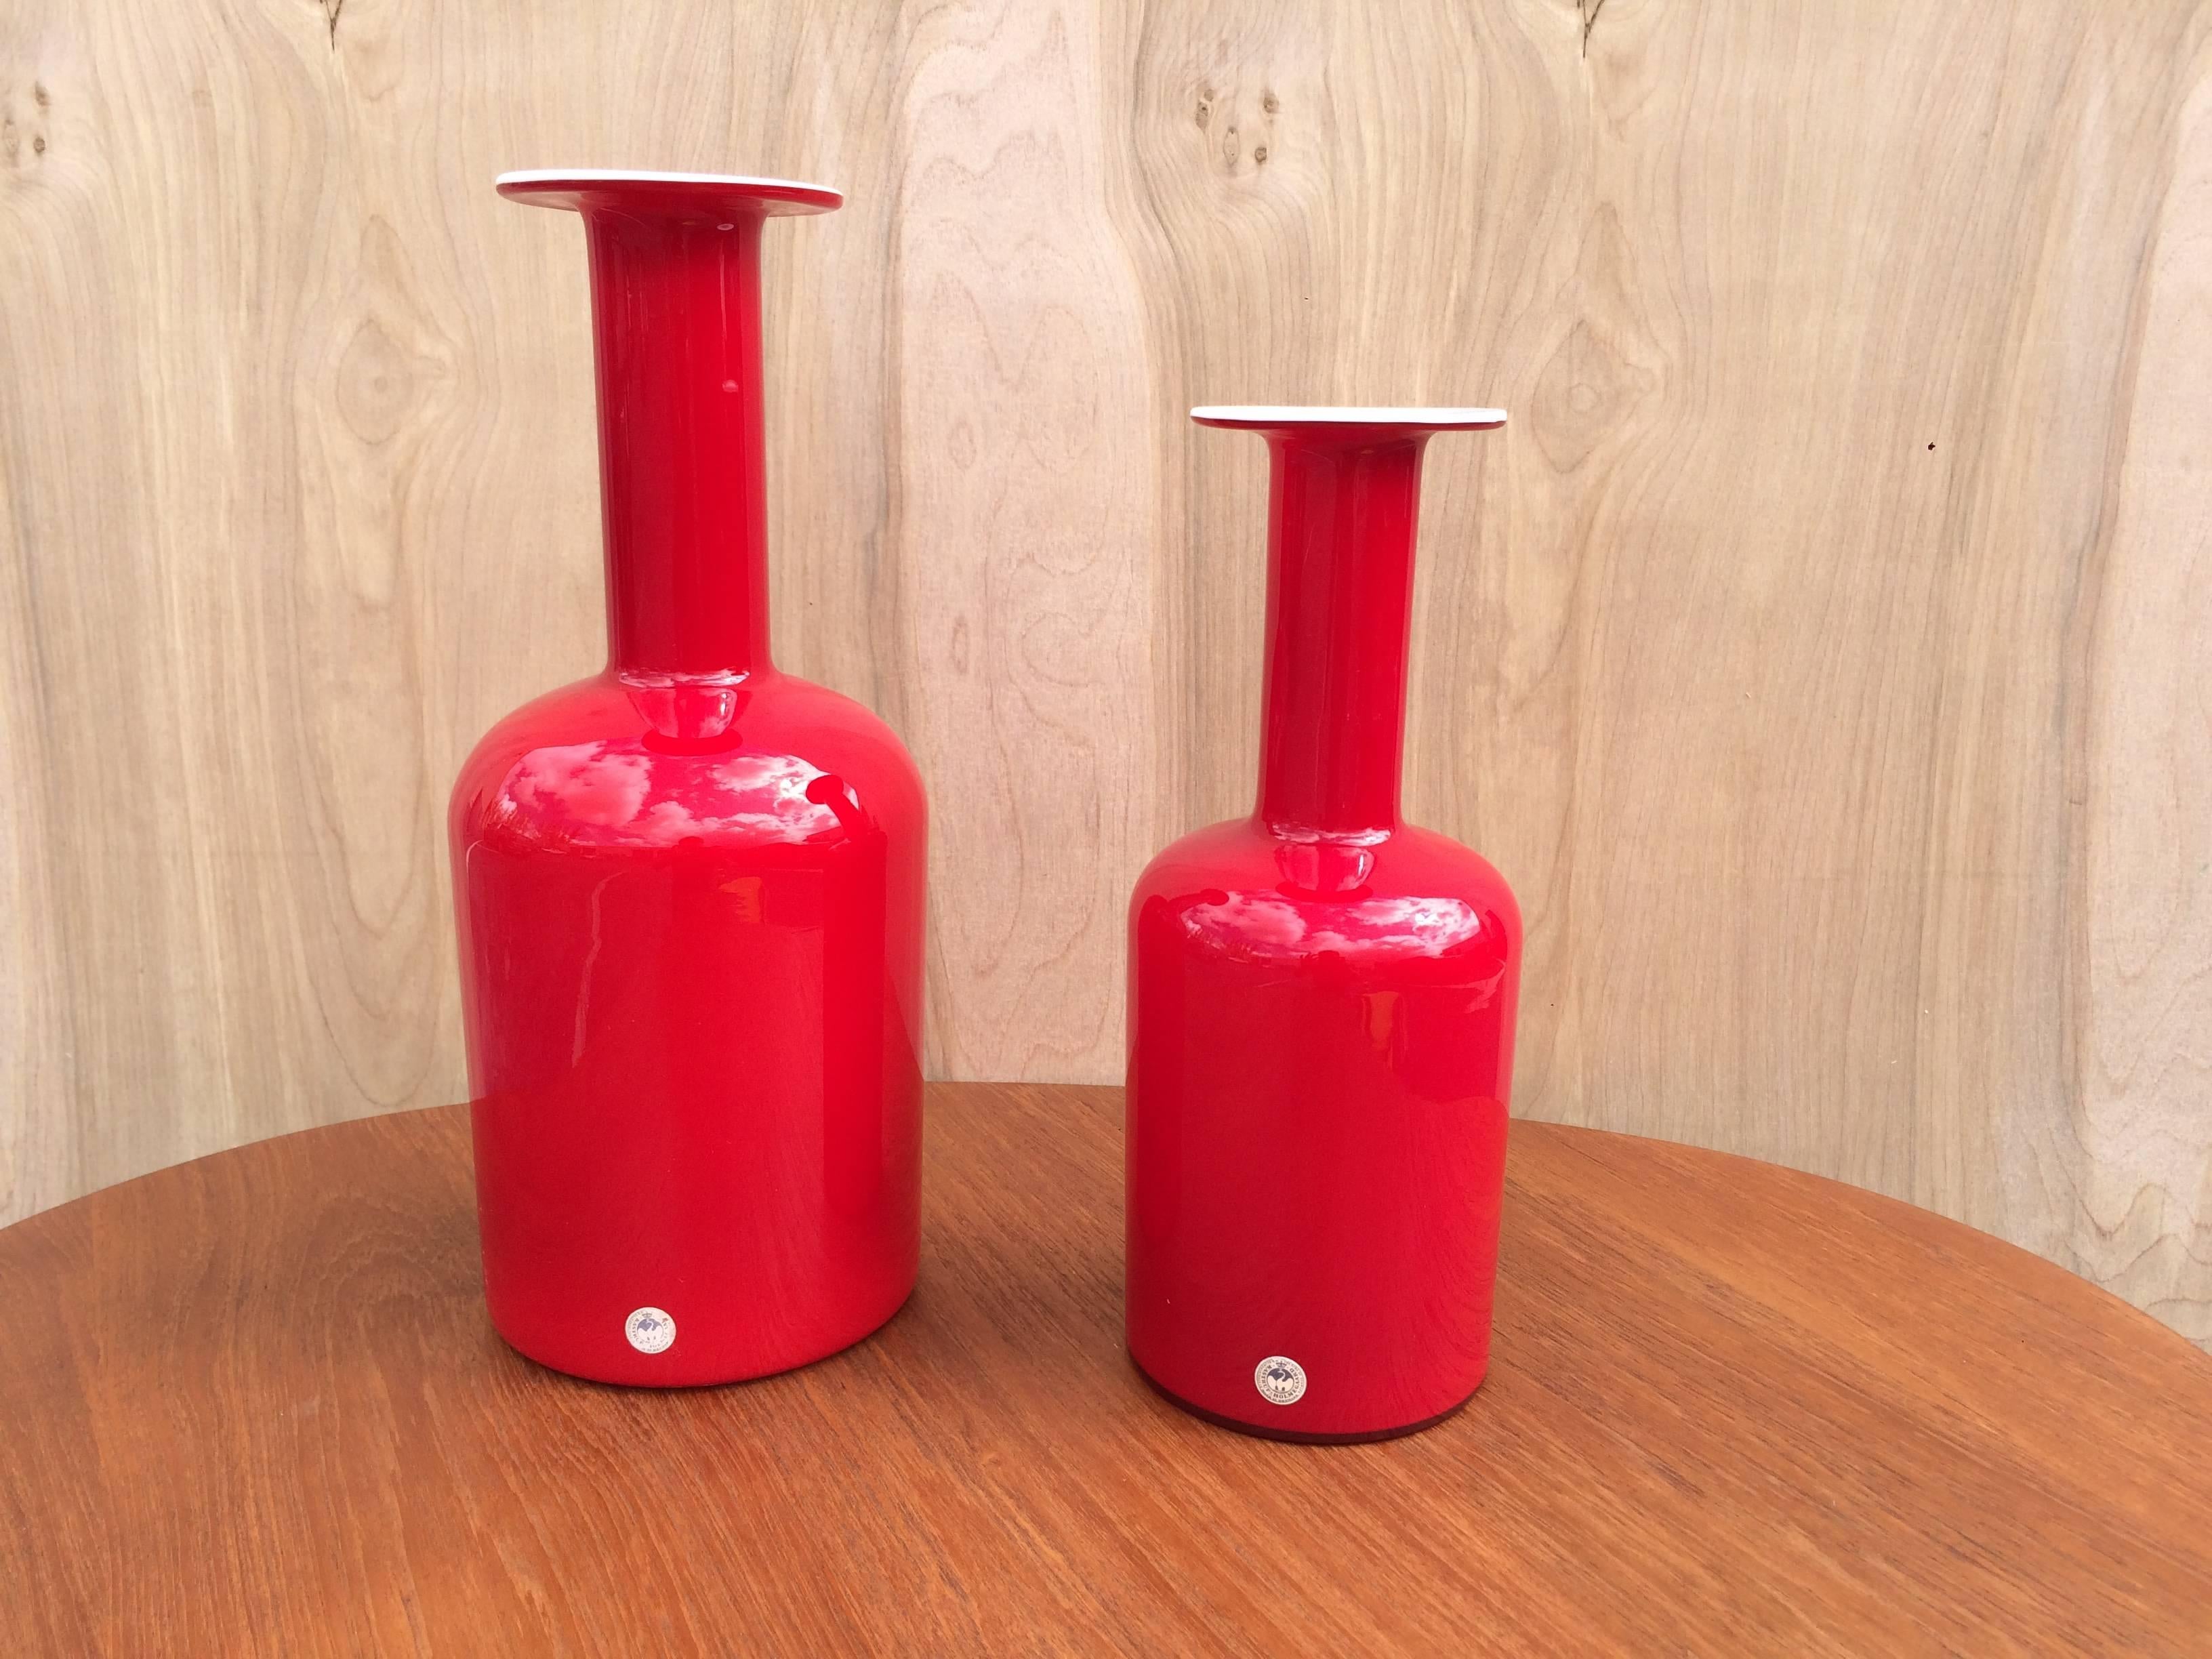 Set of three vases, two red and one green, measure: smaller vase is 12'' high and 4.75